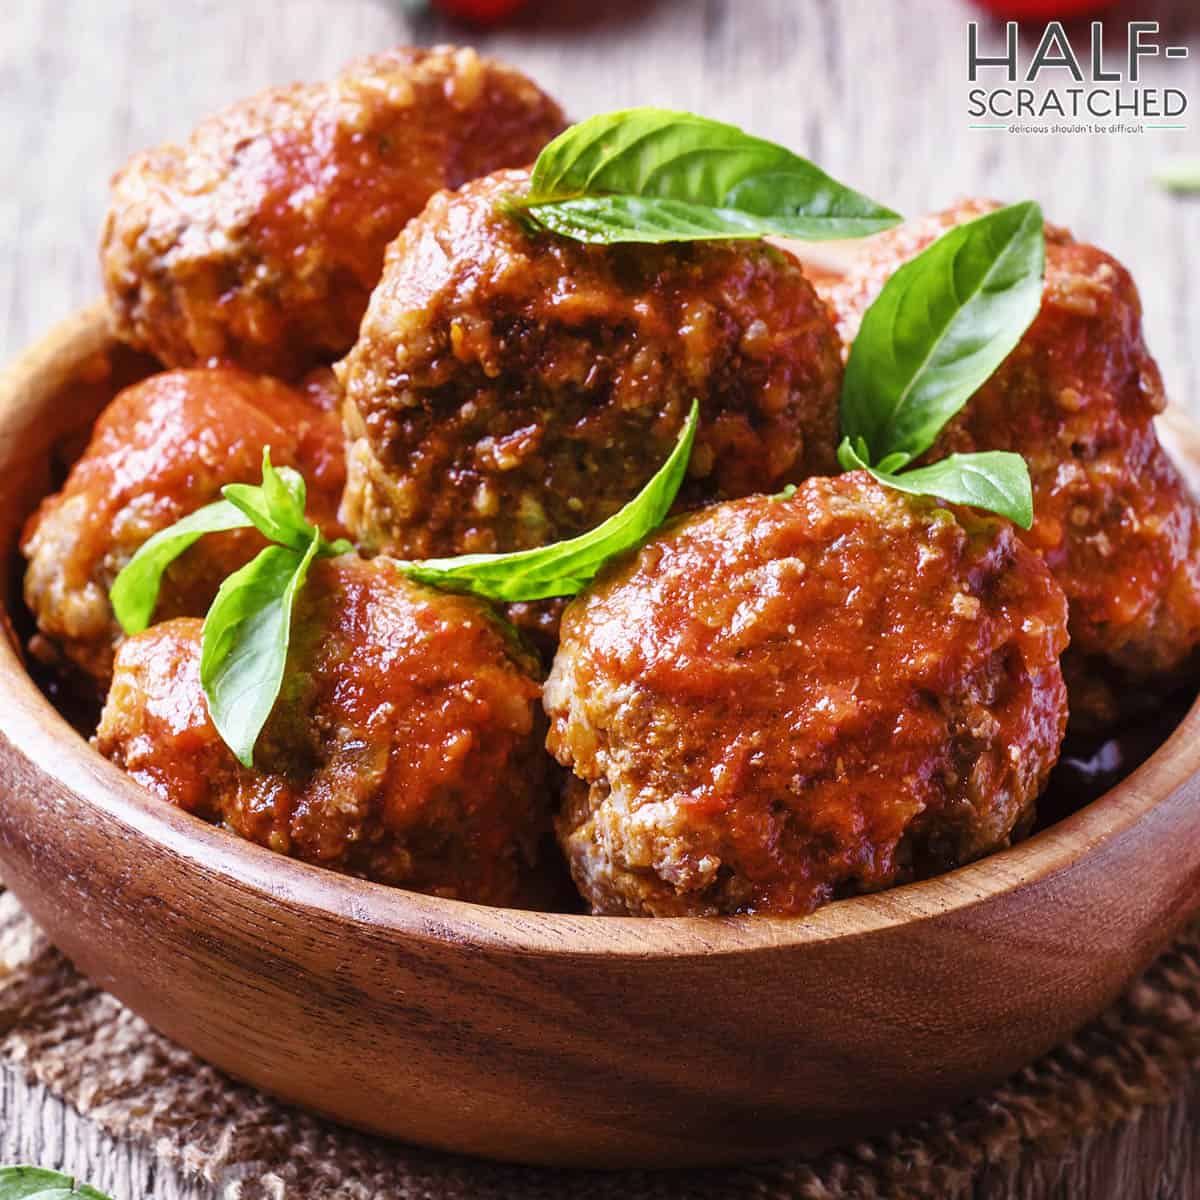 Meatballs covered in tomato sauce